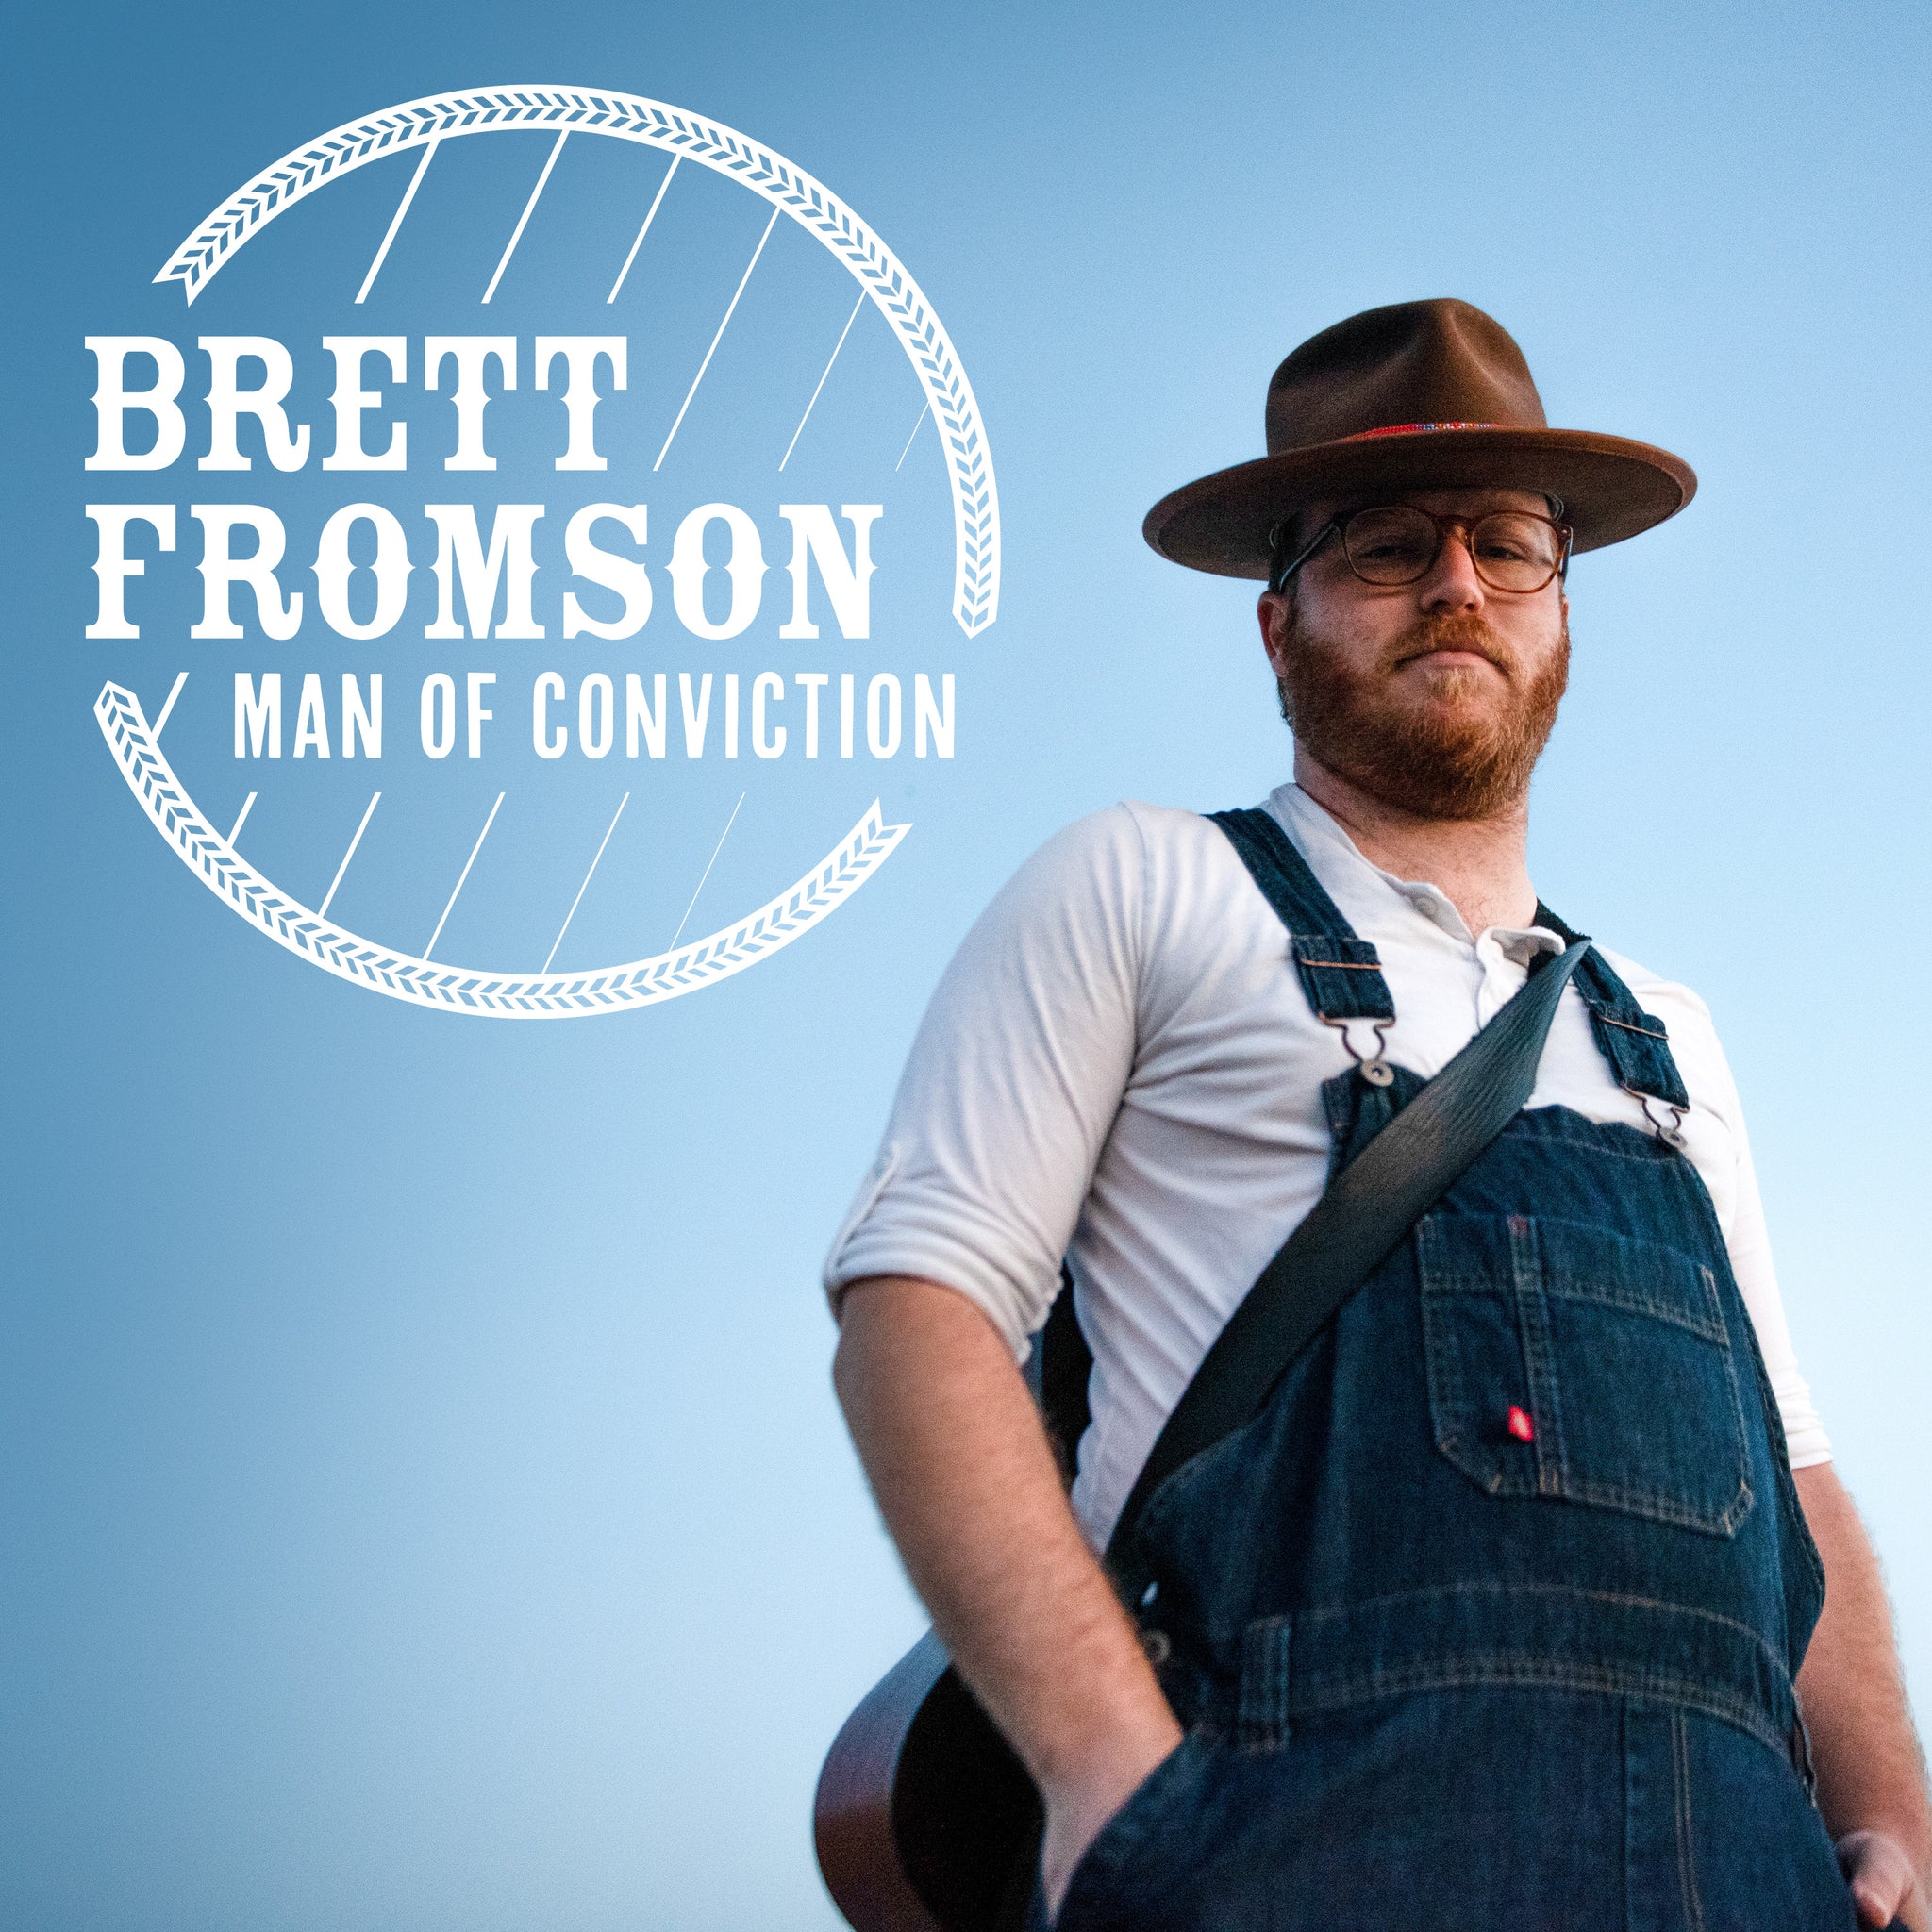 Brett Fromson  "Man Of Conviction" Digipak CD Album + Download - OUT NOW